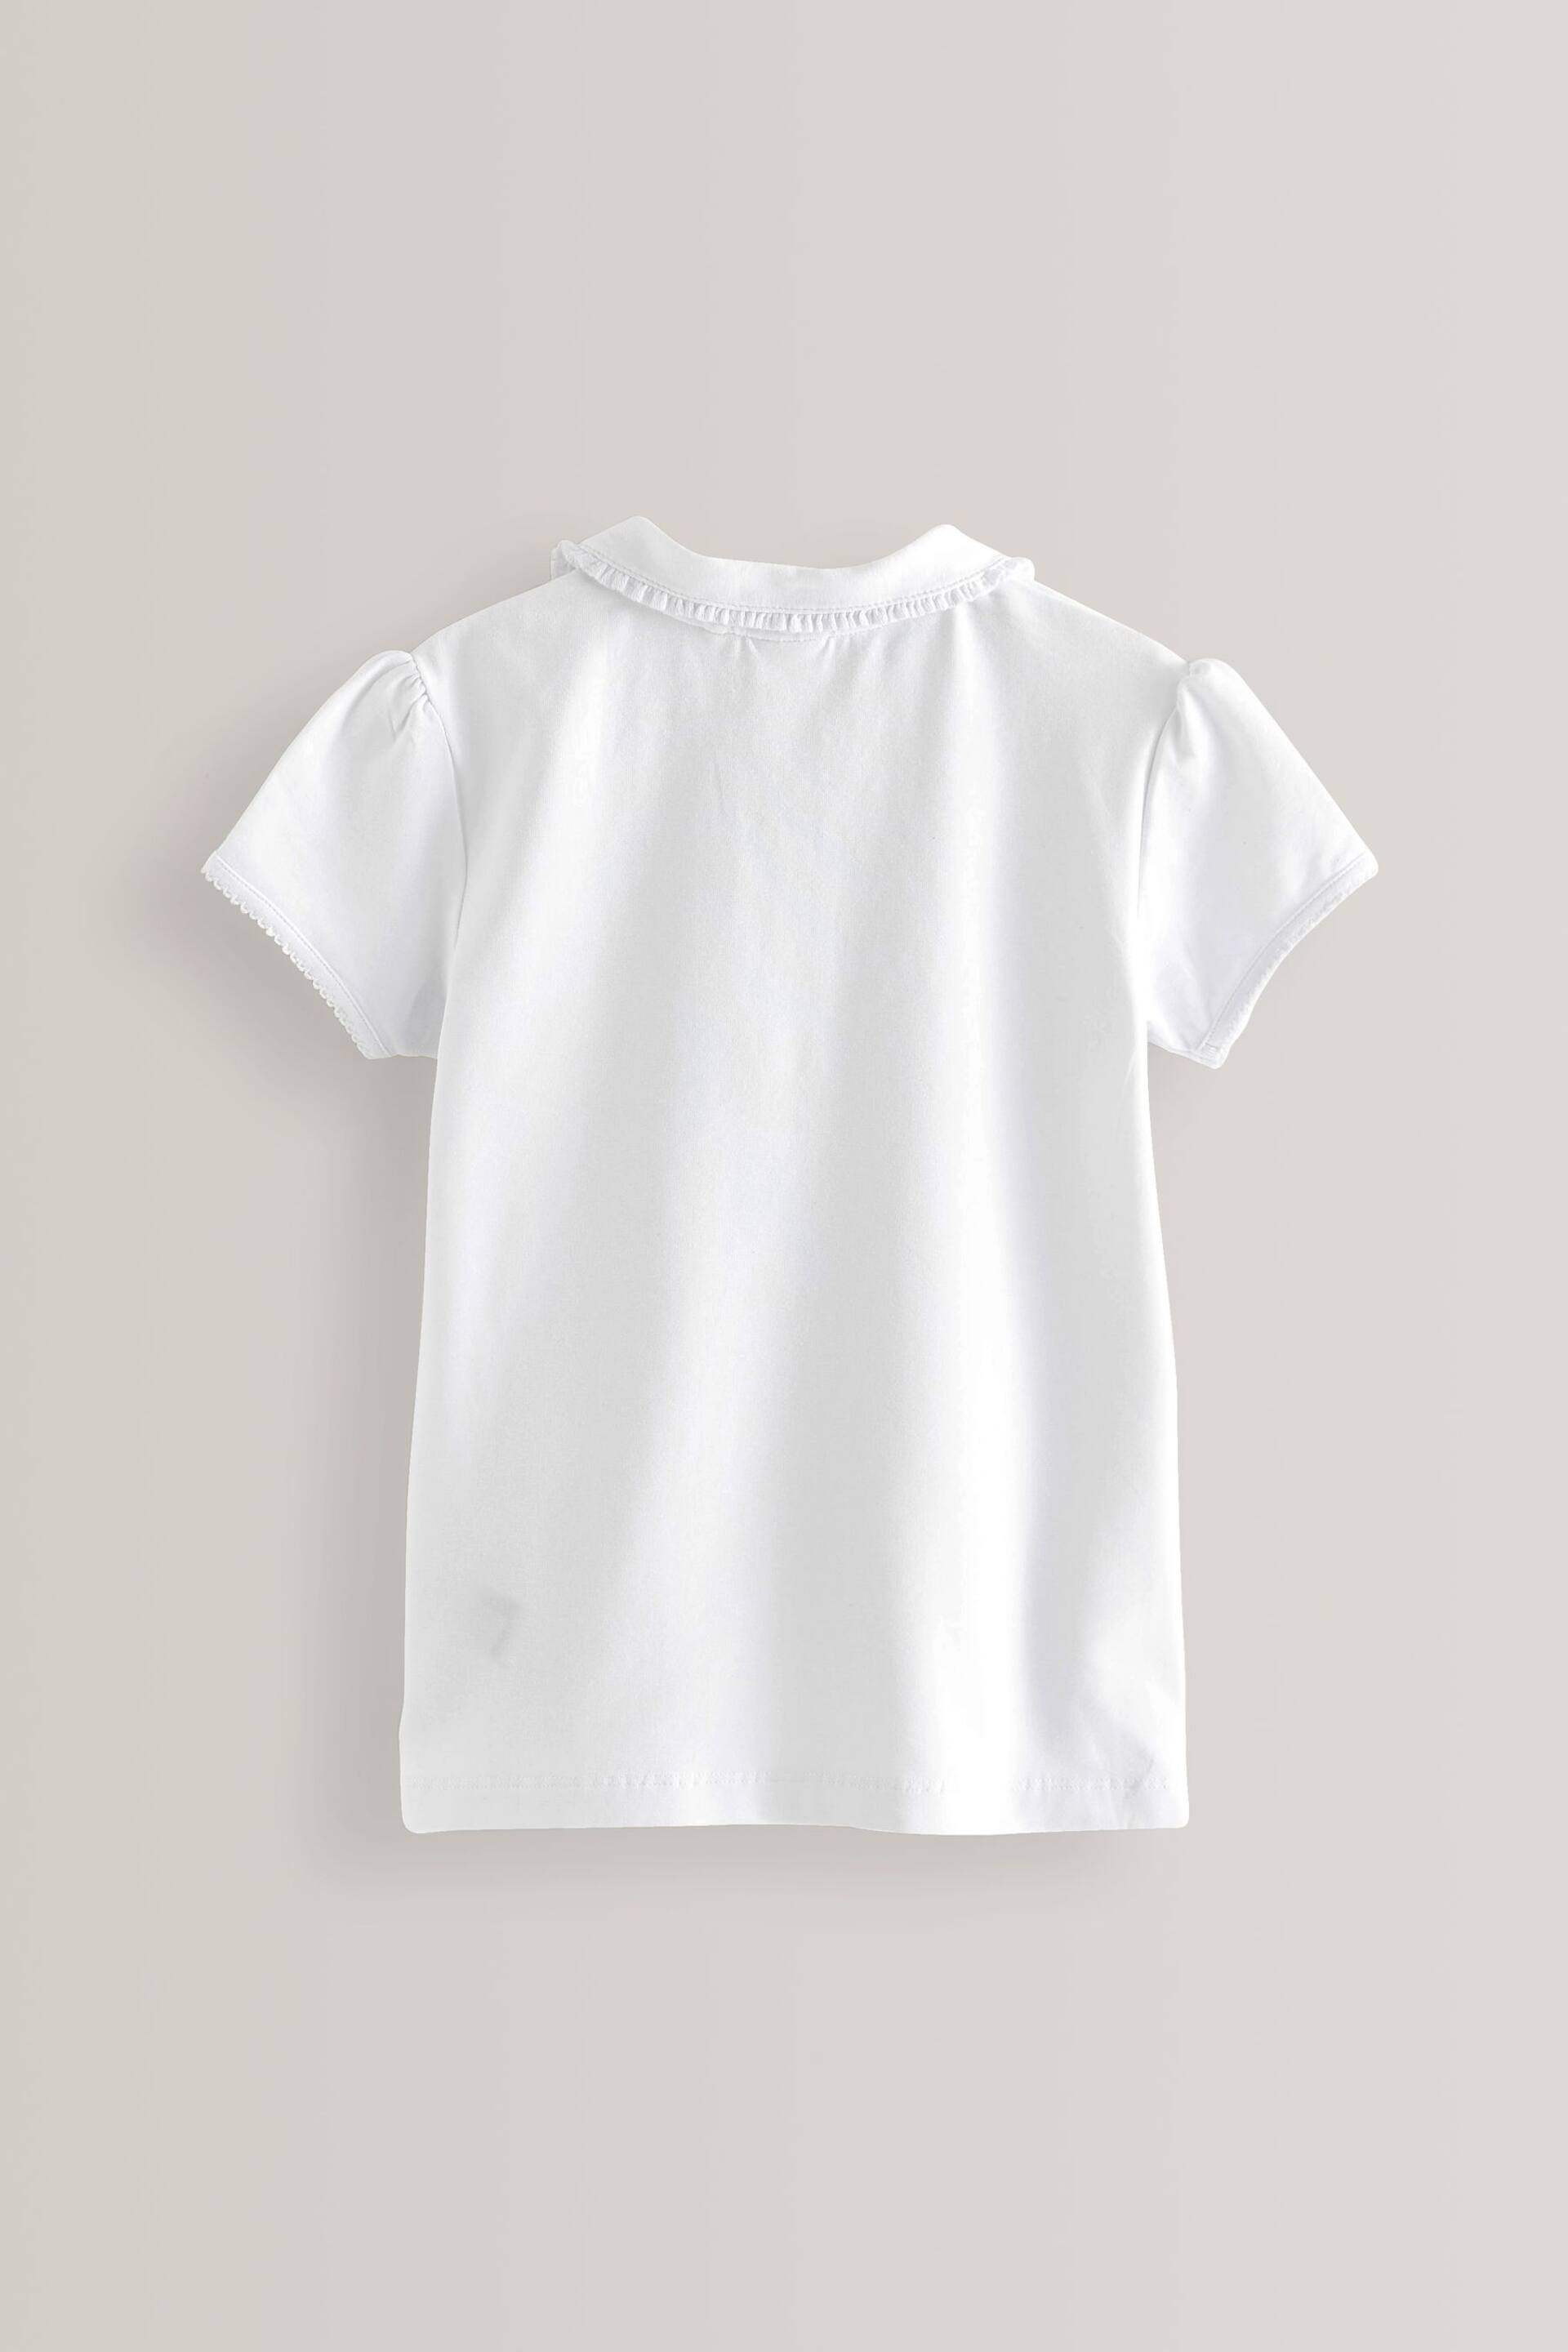 White Cotton Stretch Pretty Collar Jersey Tops 2 Pack (3-16yrs) - Image 6 of 8